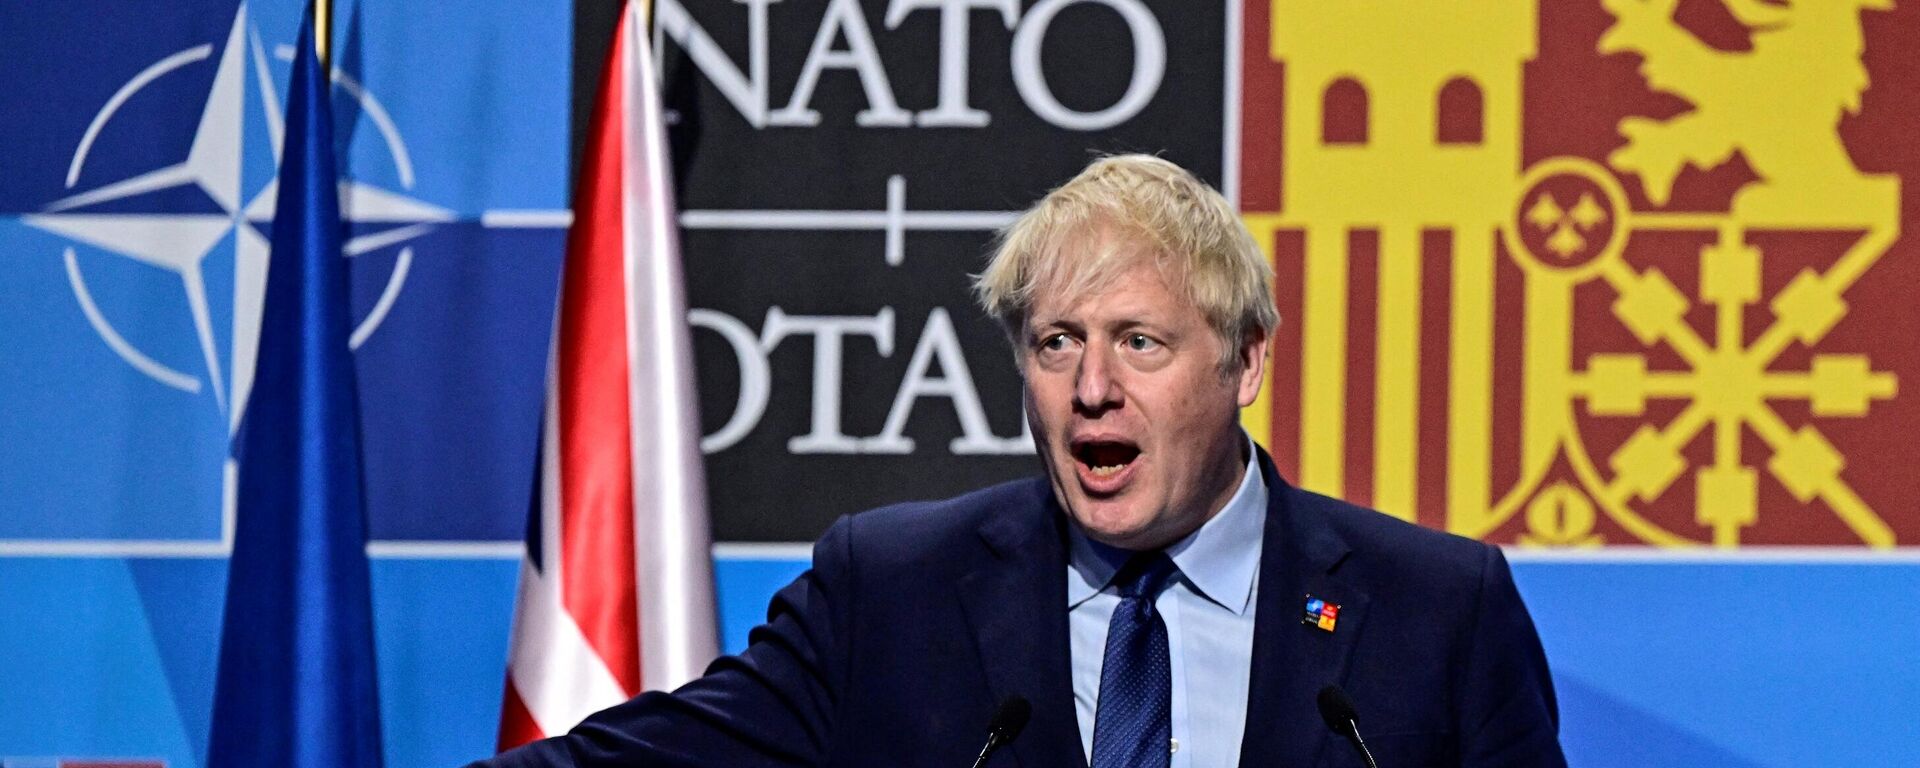 Britain's Prime Minister Boris Johnson gestures as he addresses media representatives during a press conference at the NATO summit at the Ifema congress centre in Madrid, on June 30, 2022. - Sputnik International, 1920, 30.06.2022